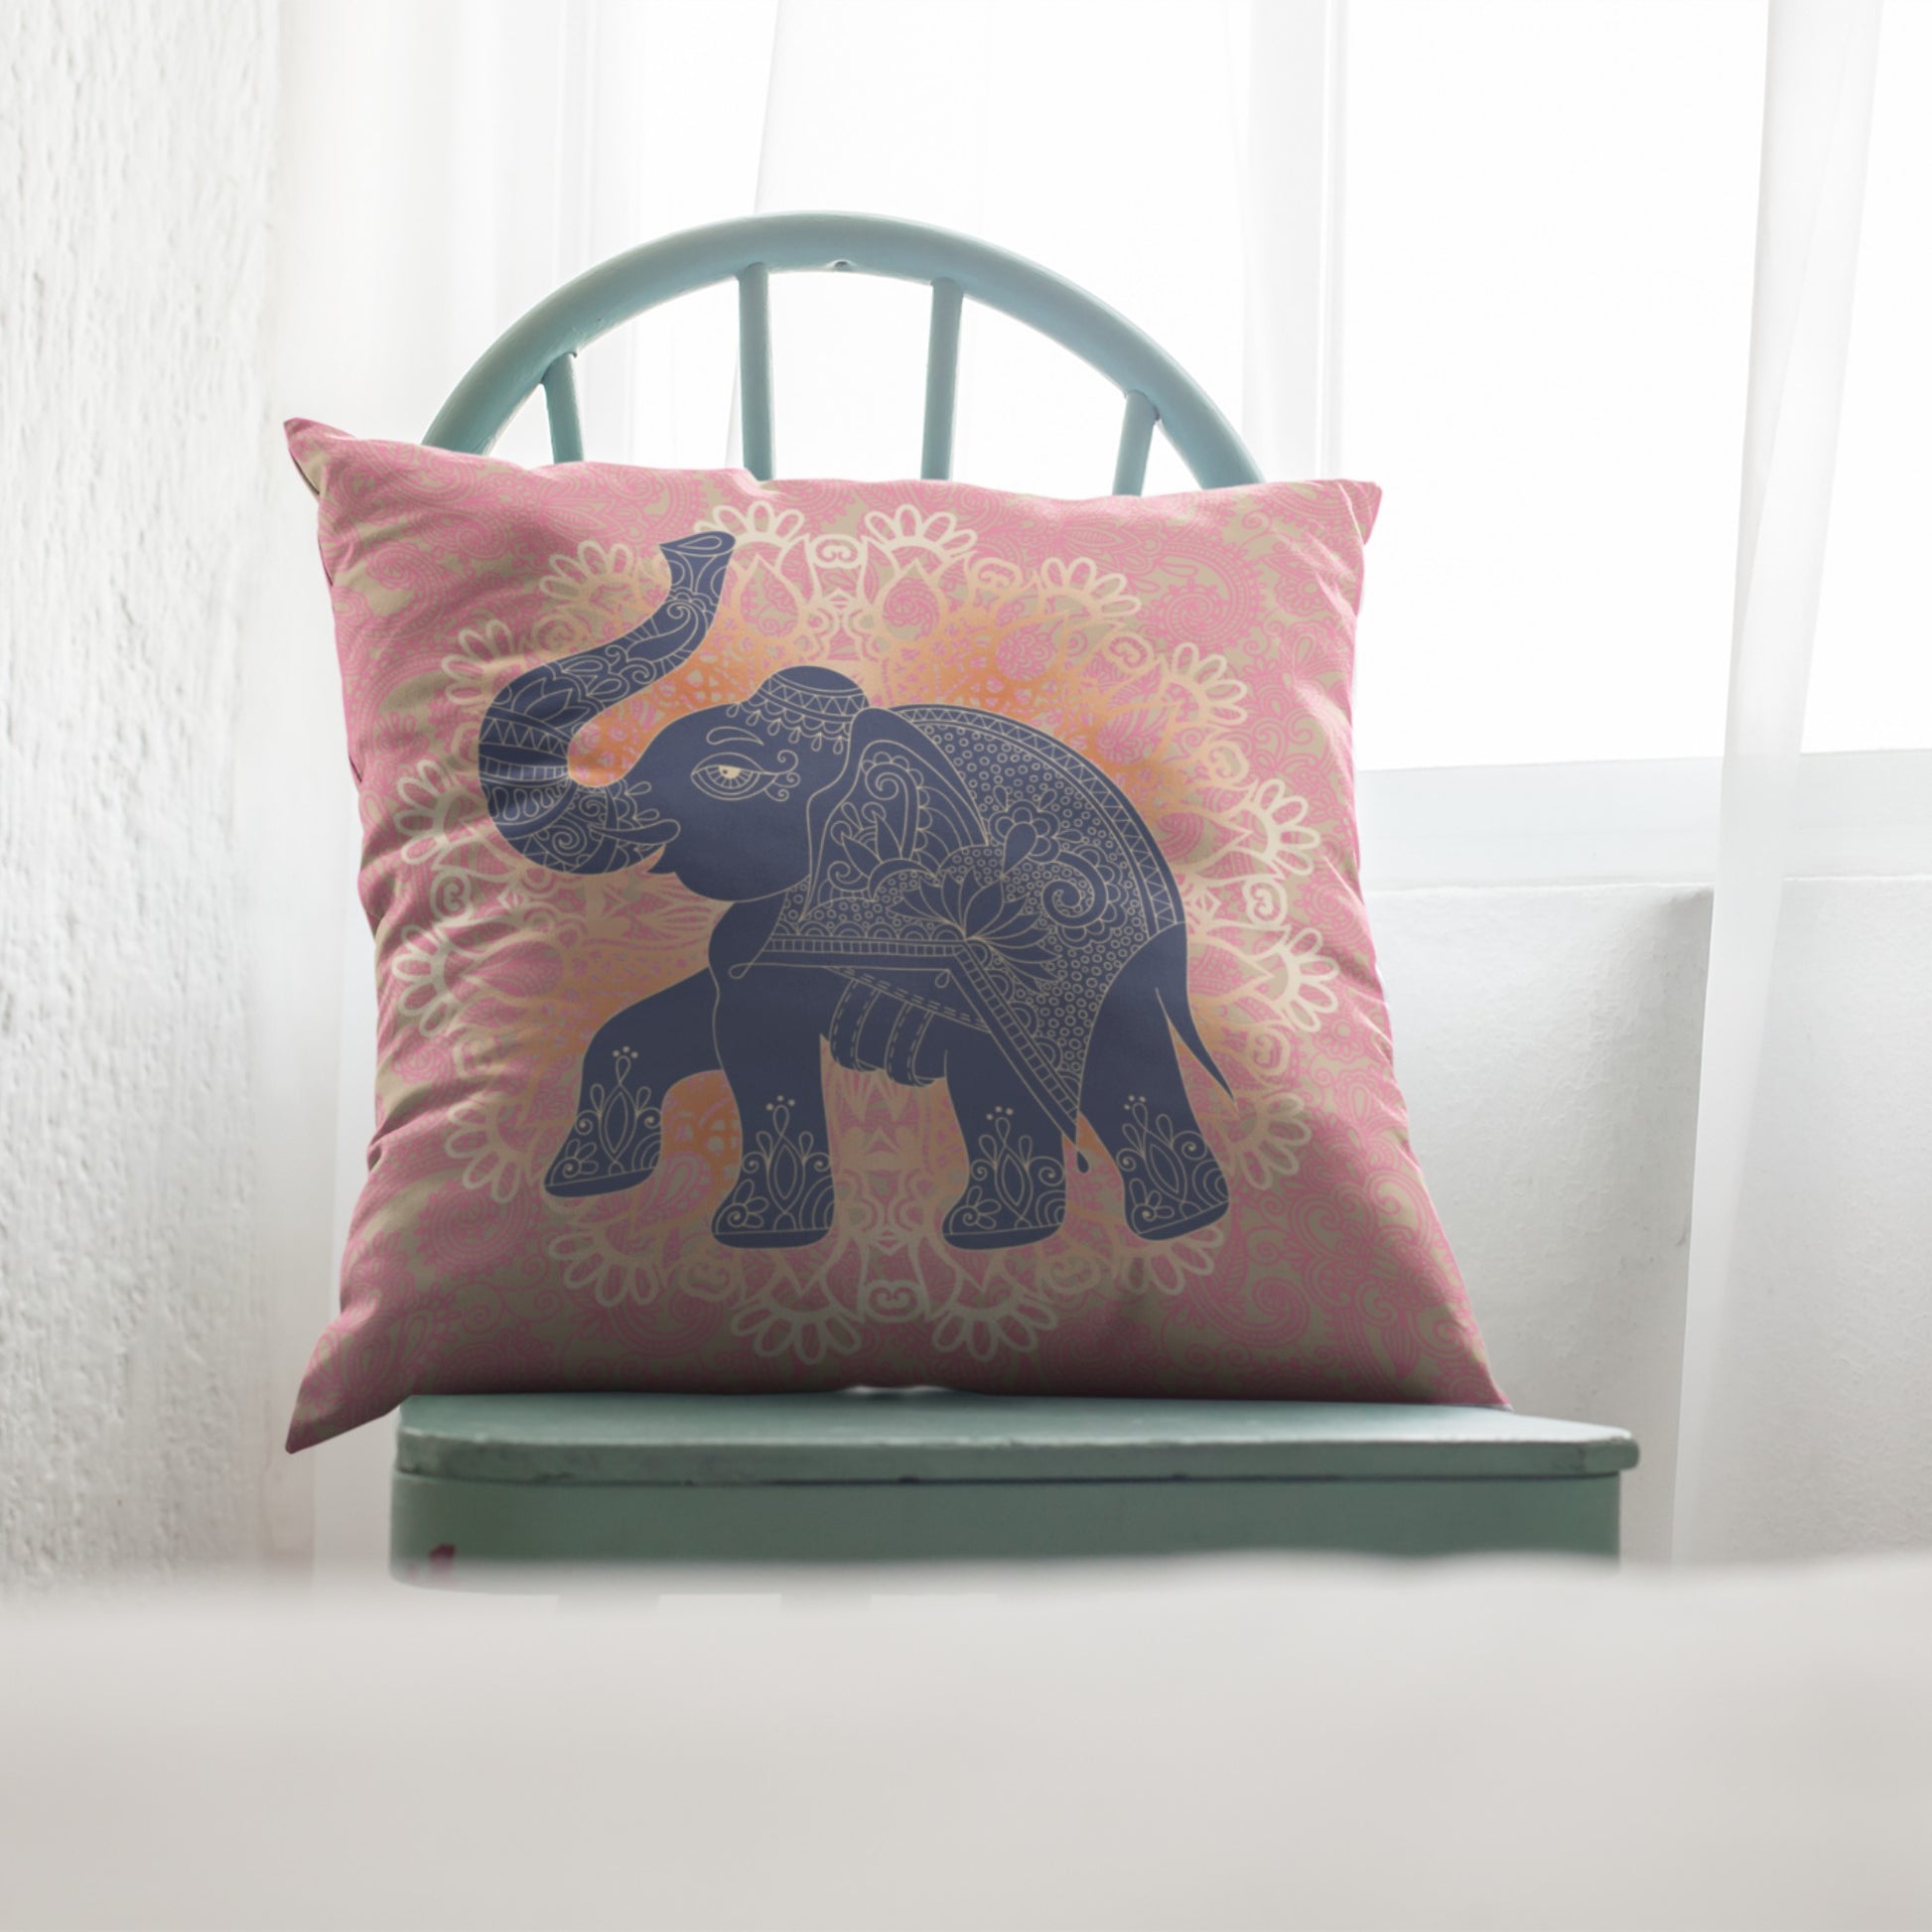 Playful Elephant Design Cushion in Pink